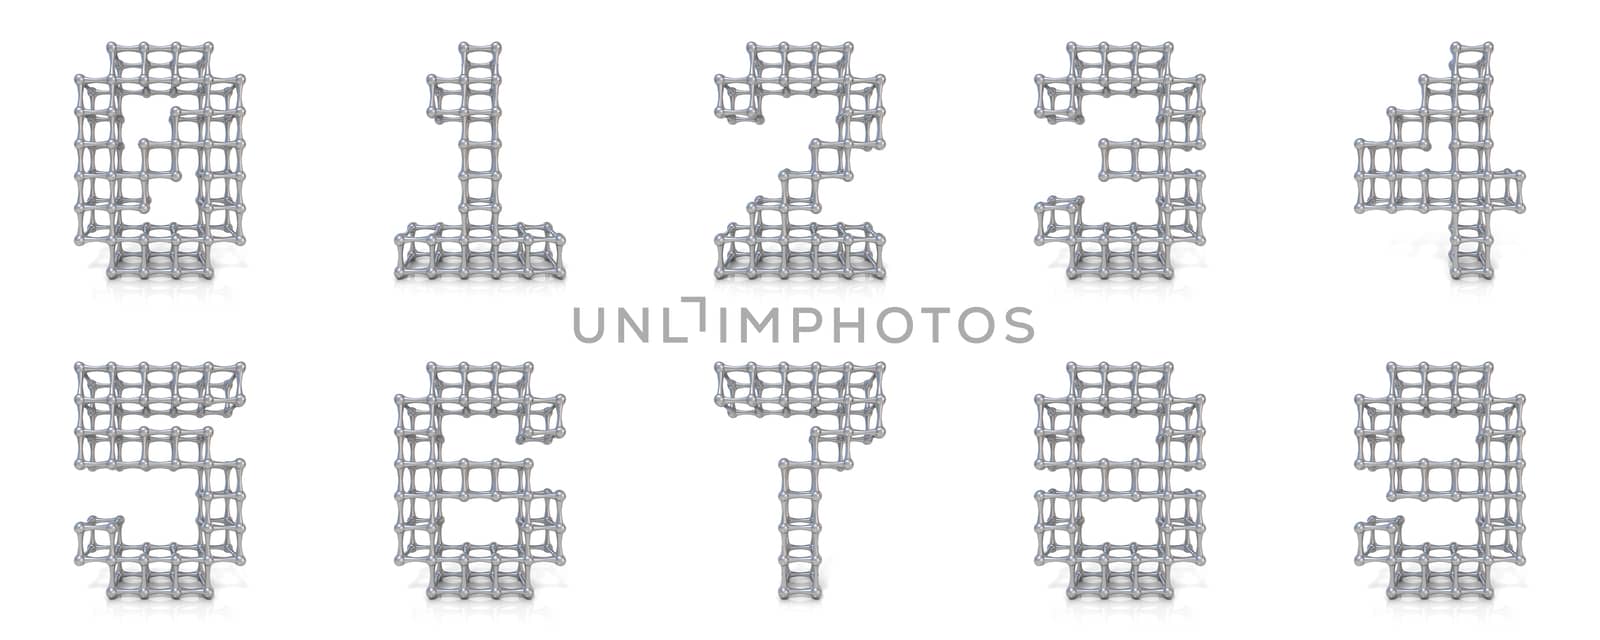 Metal lattice digits collection 3D by djmilic